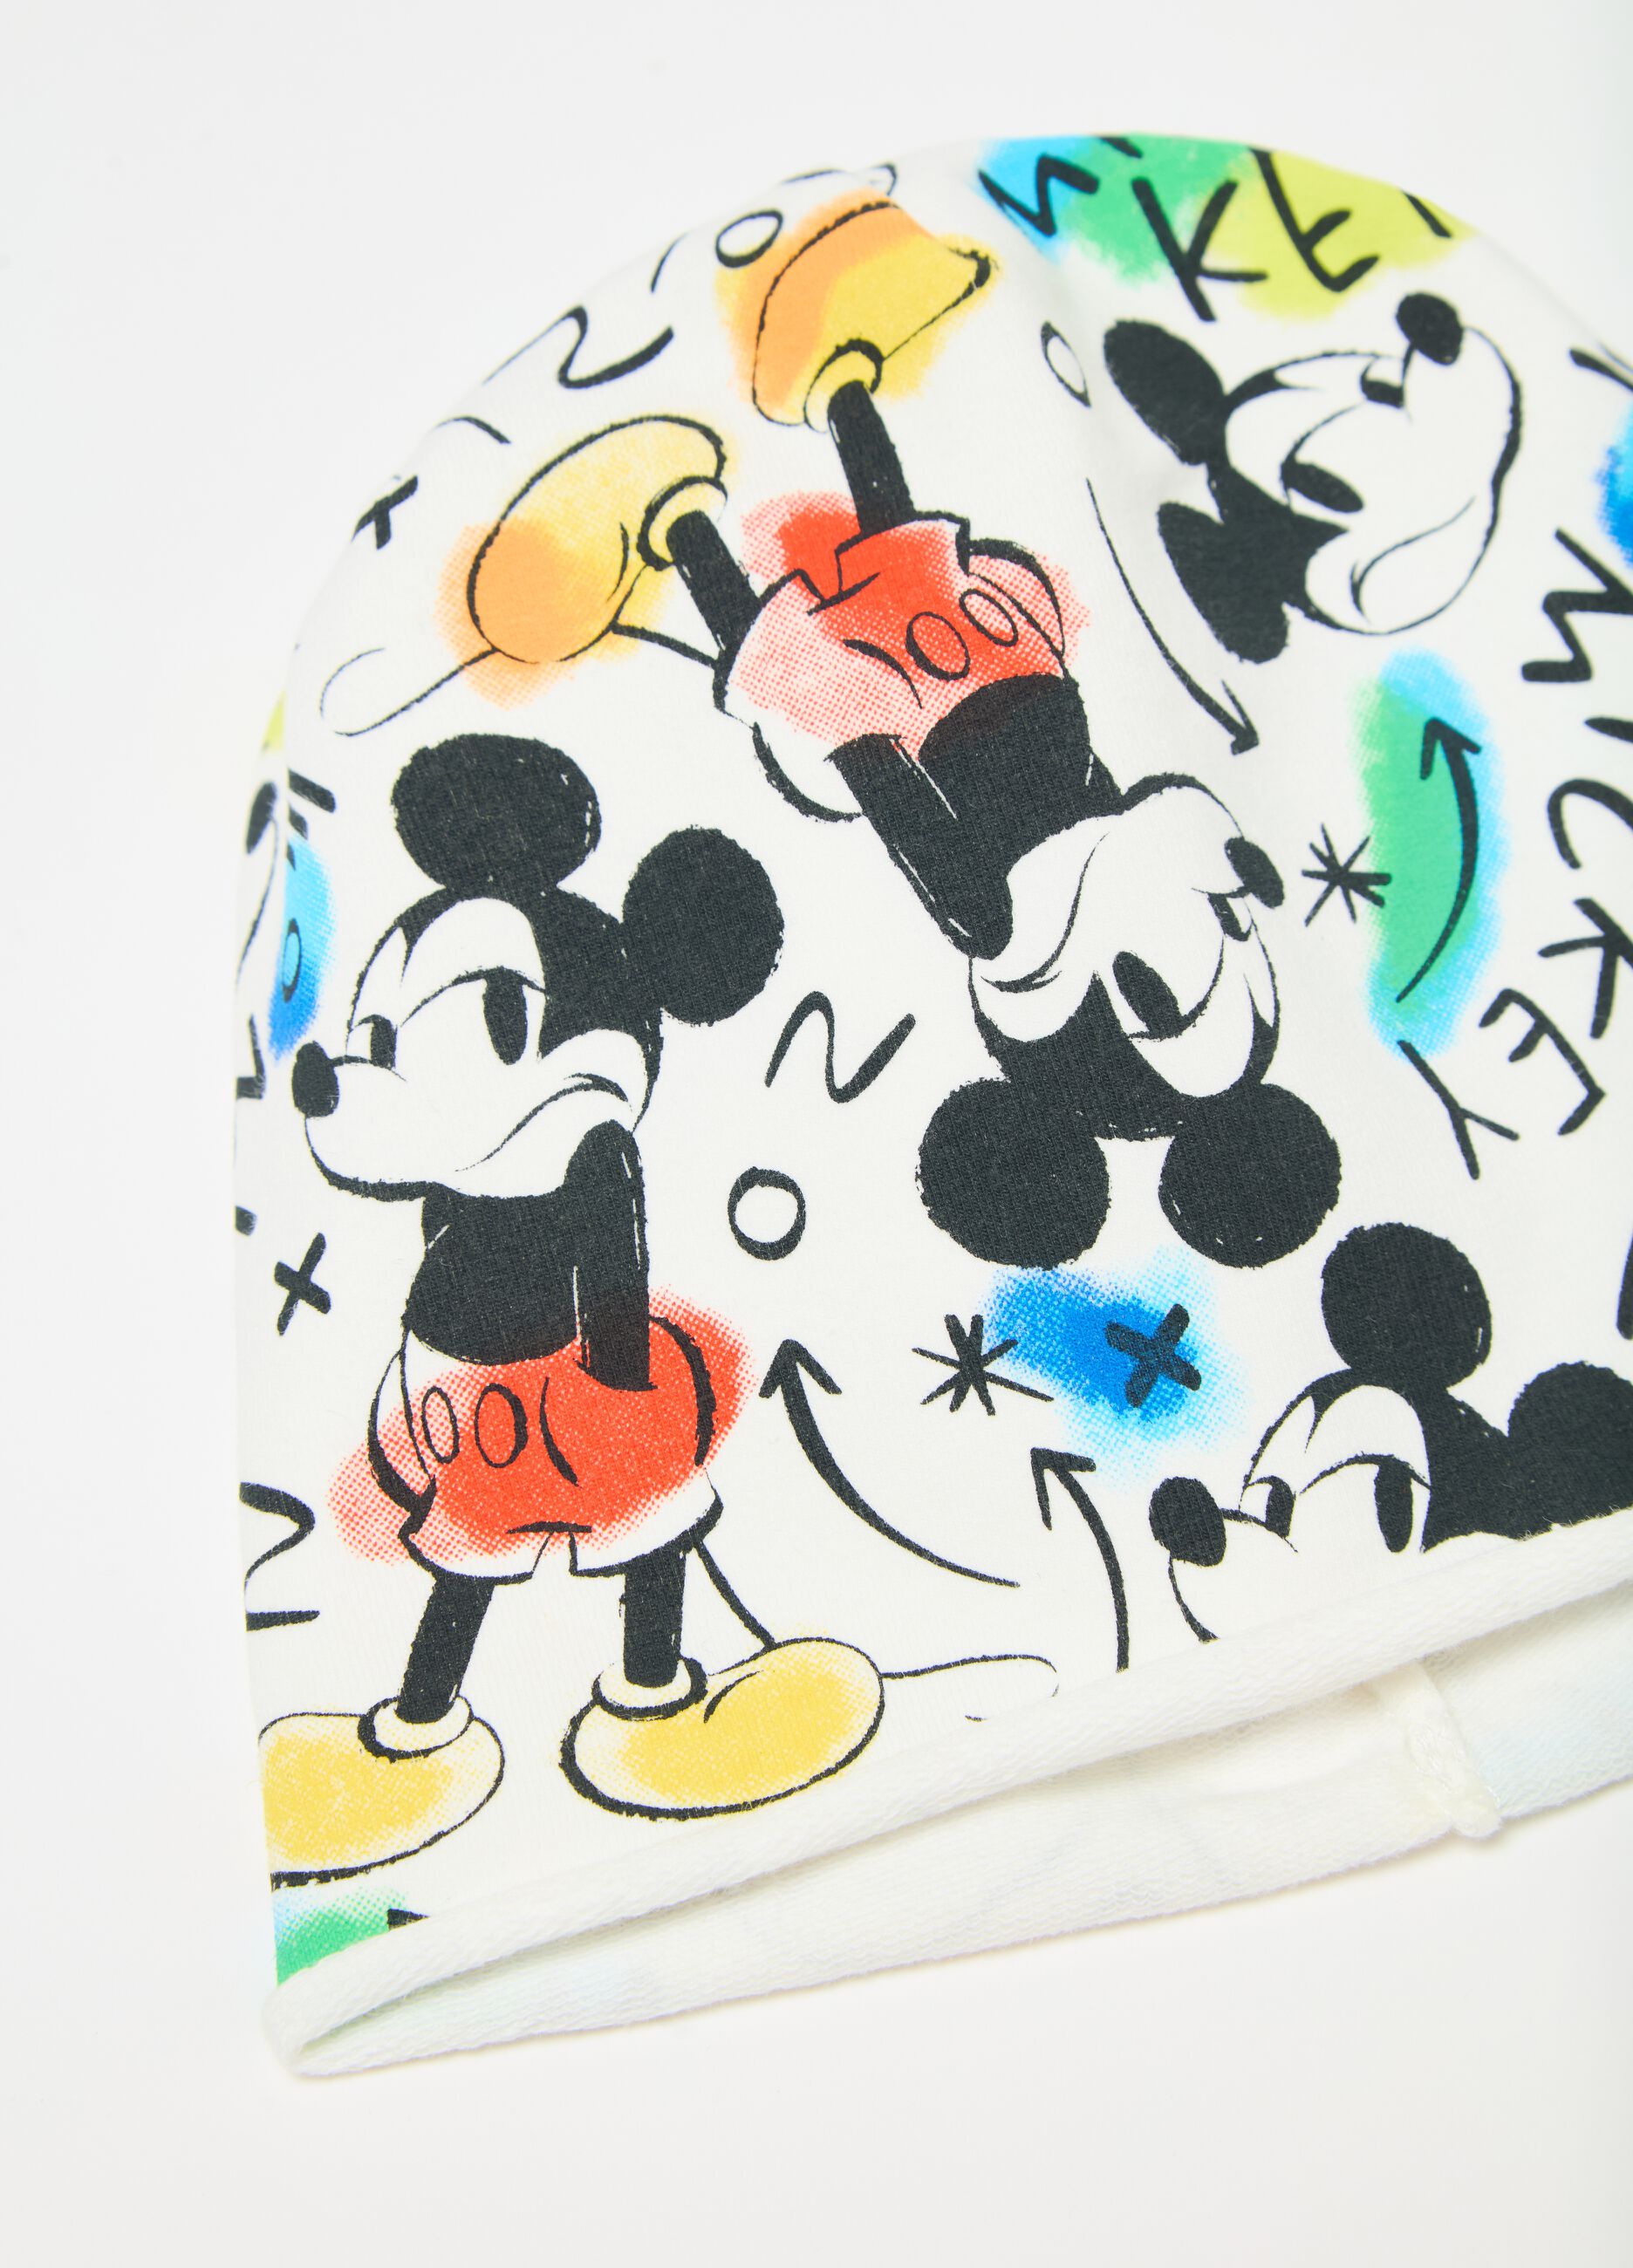 Organic cotton hat with Mickey Mouse print